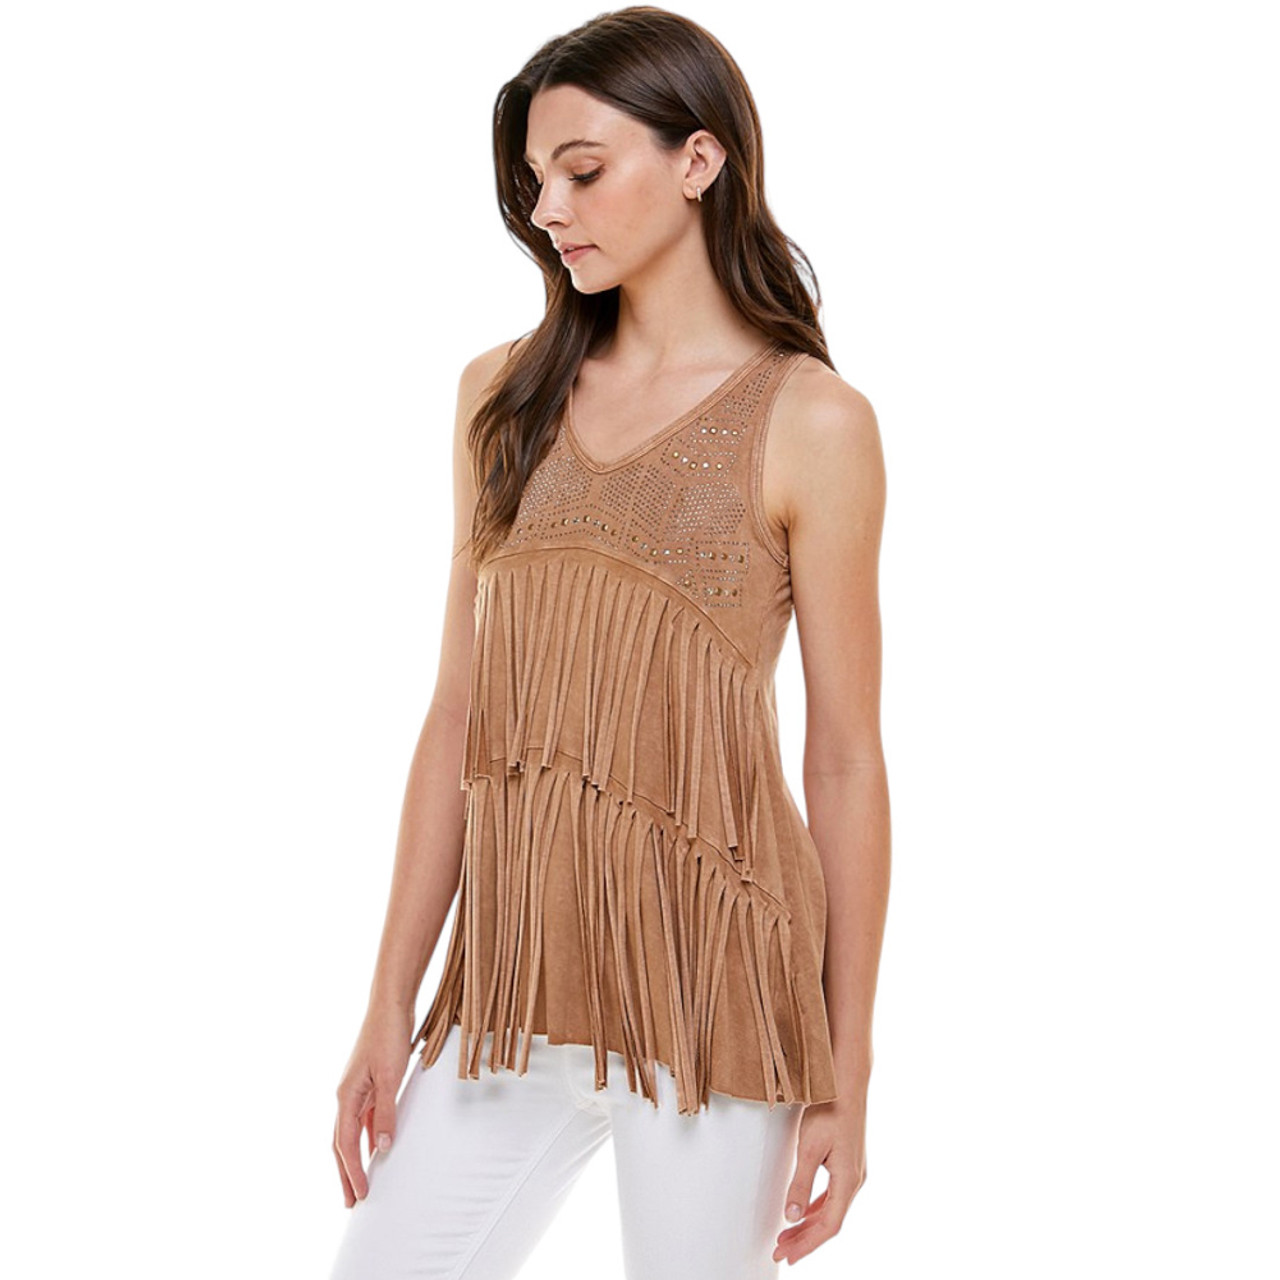 T-PARTY FRINGE AND STONE TANK TOP